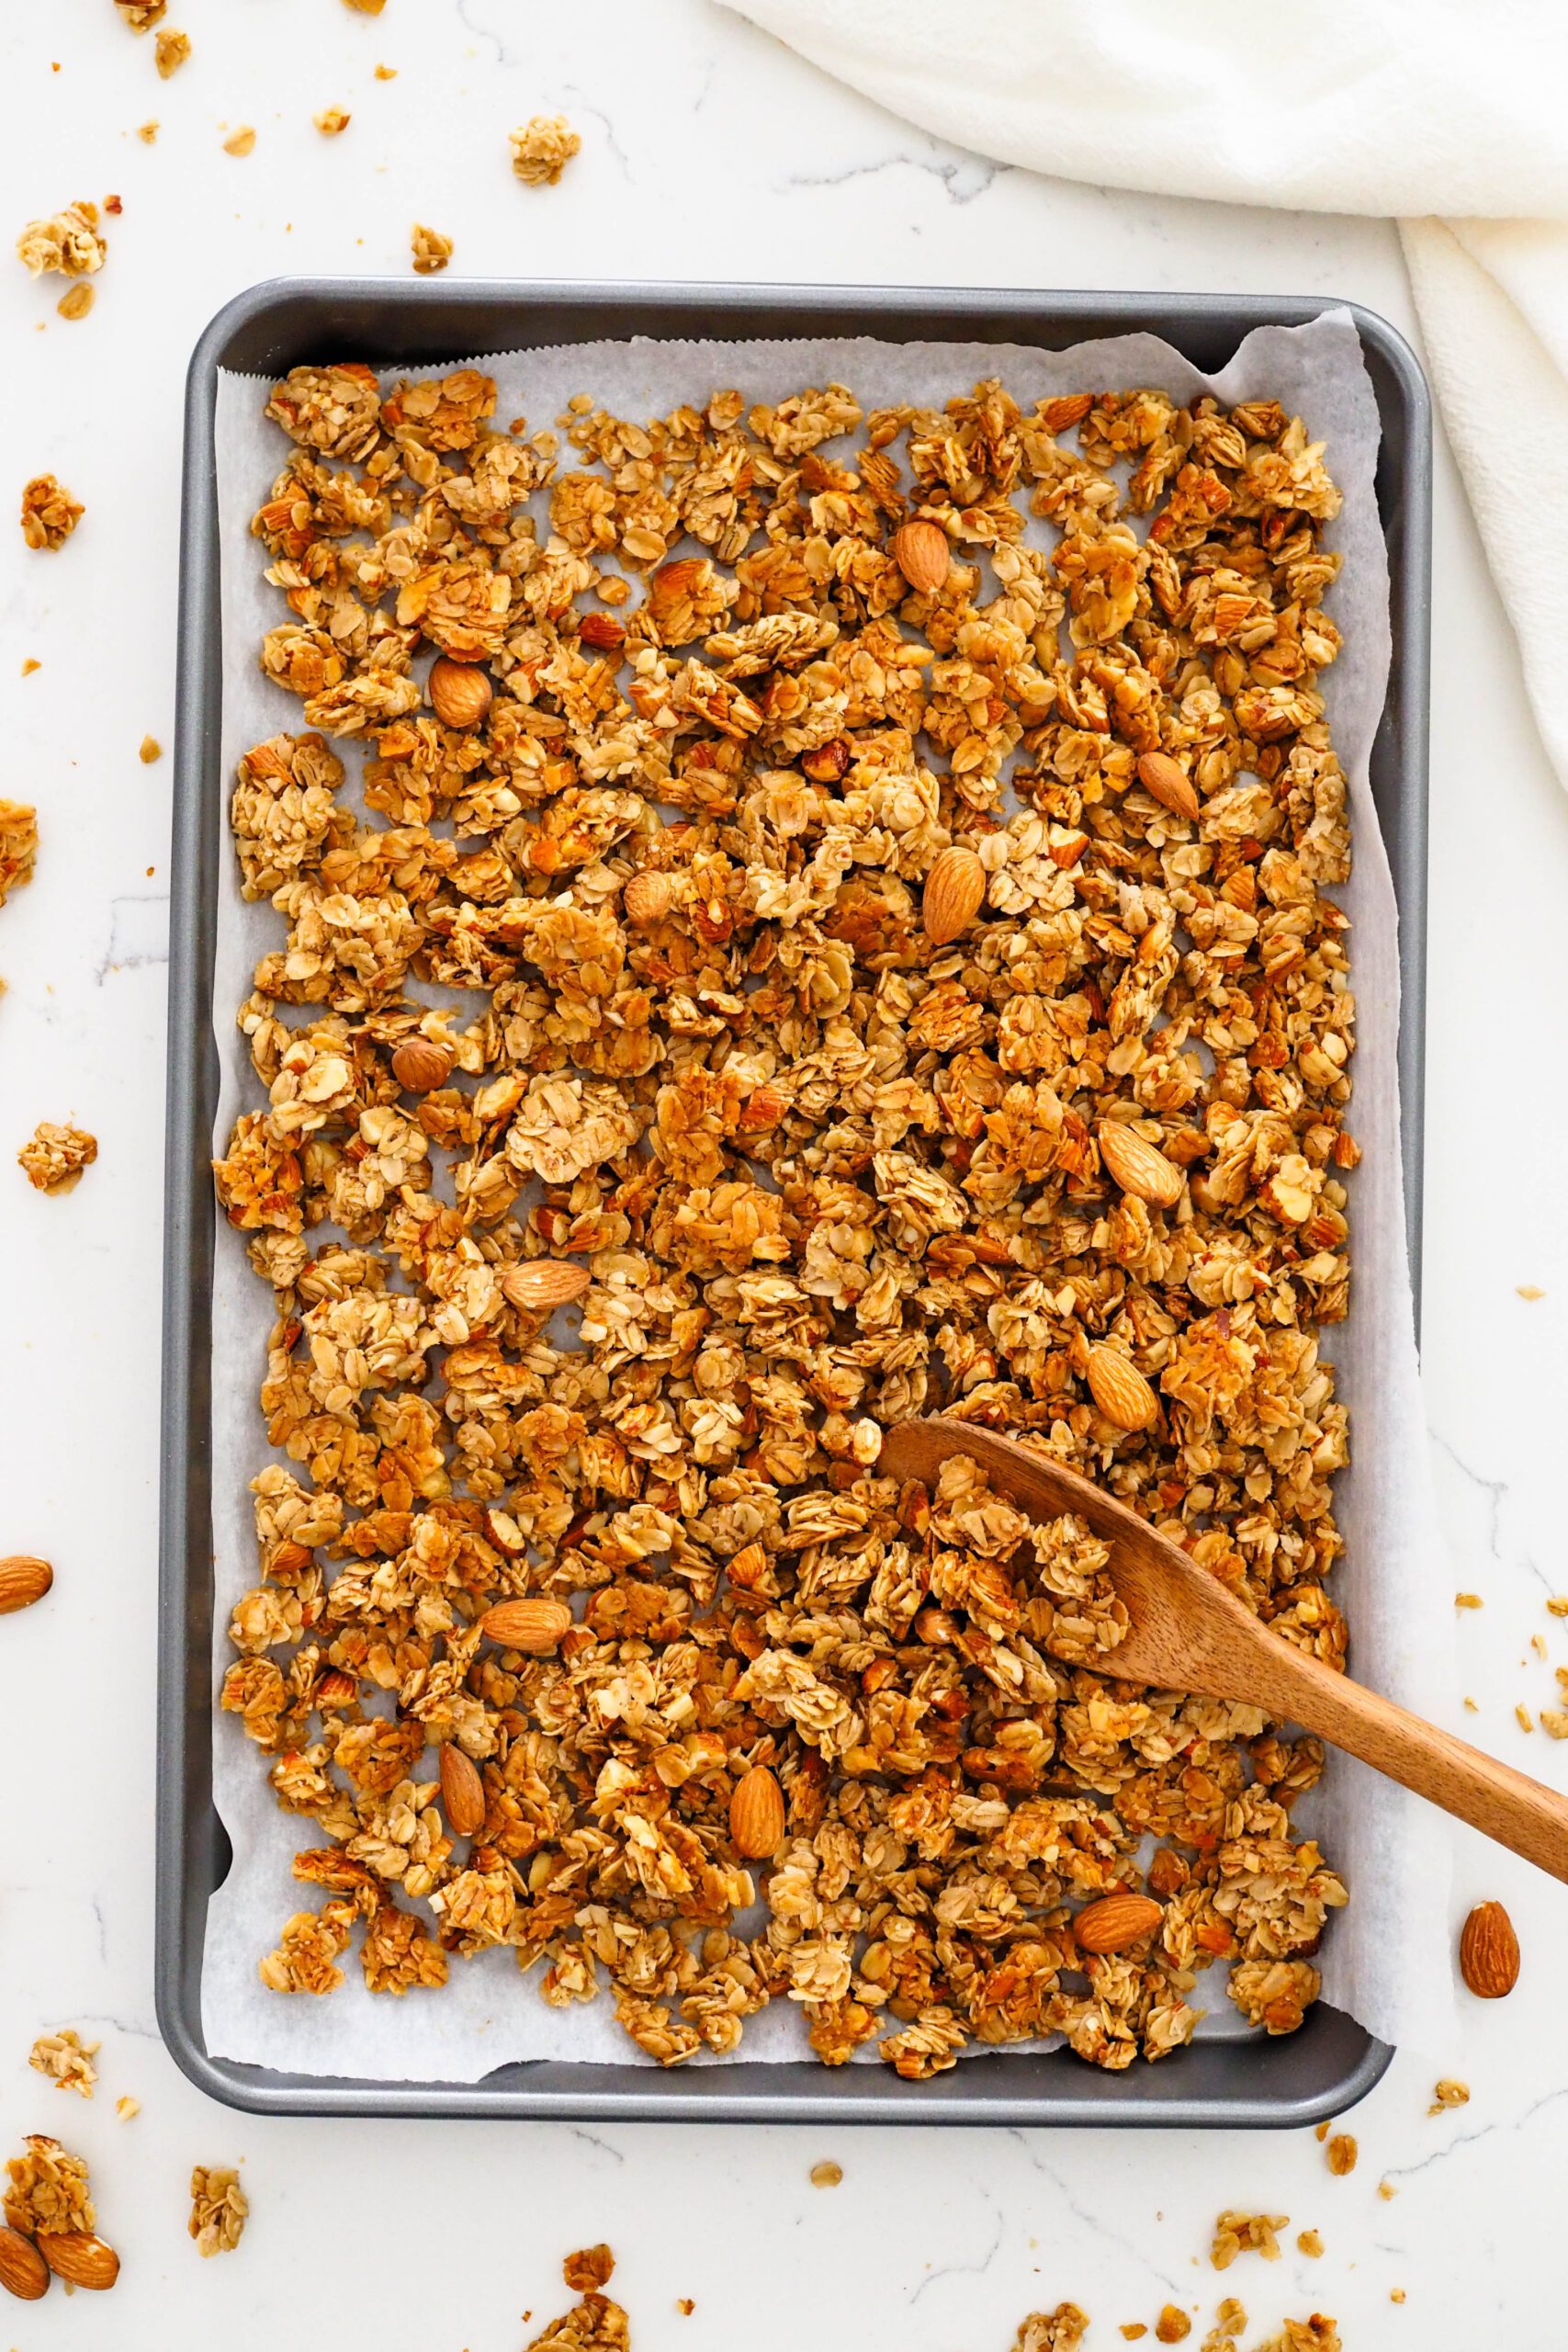 Vanilla almond granola in a baking sheet with a wooden spoon.